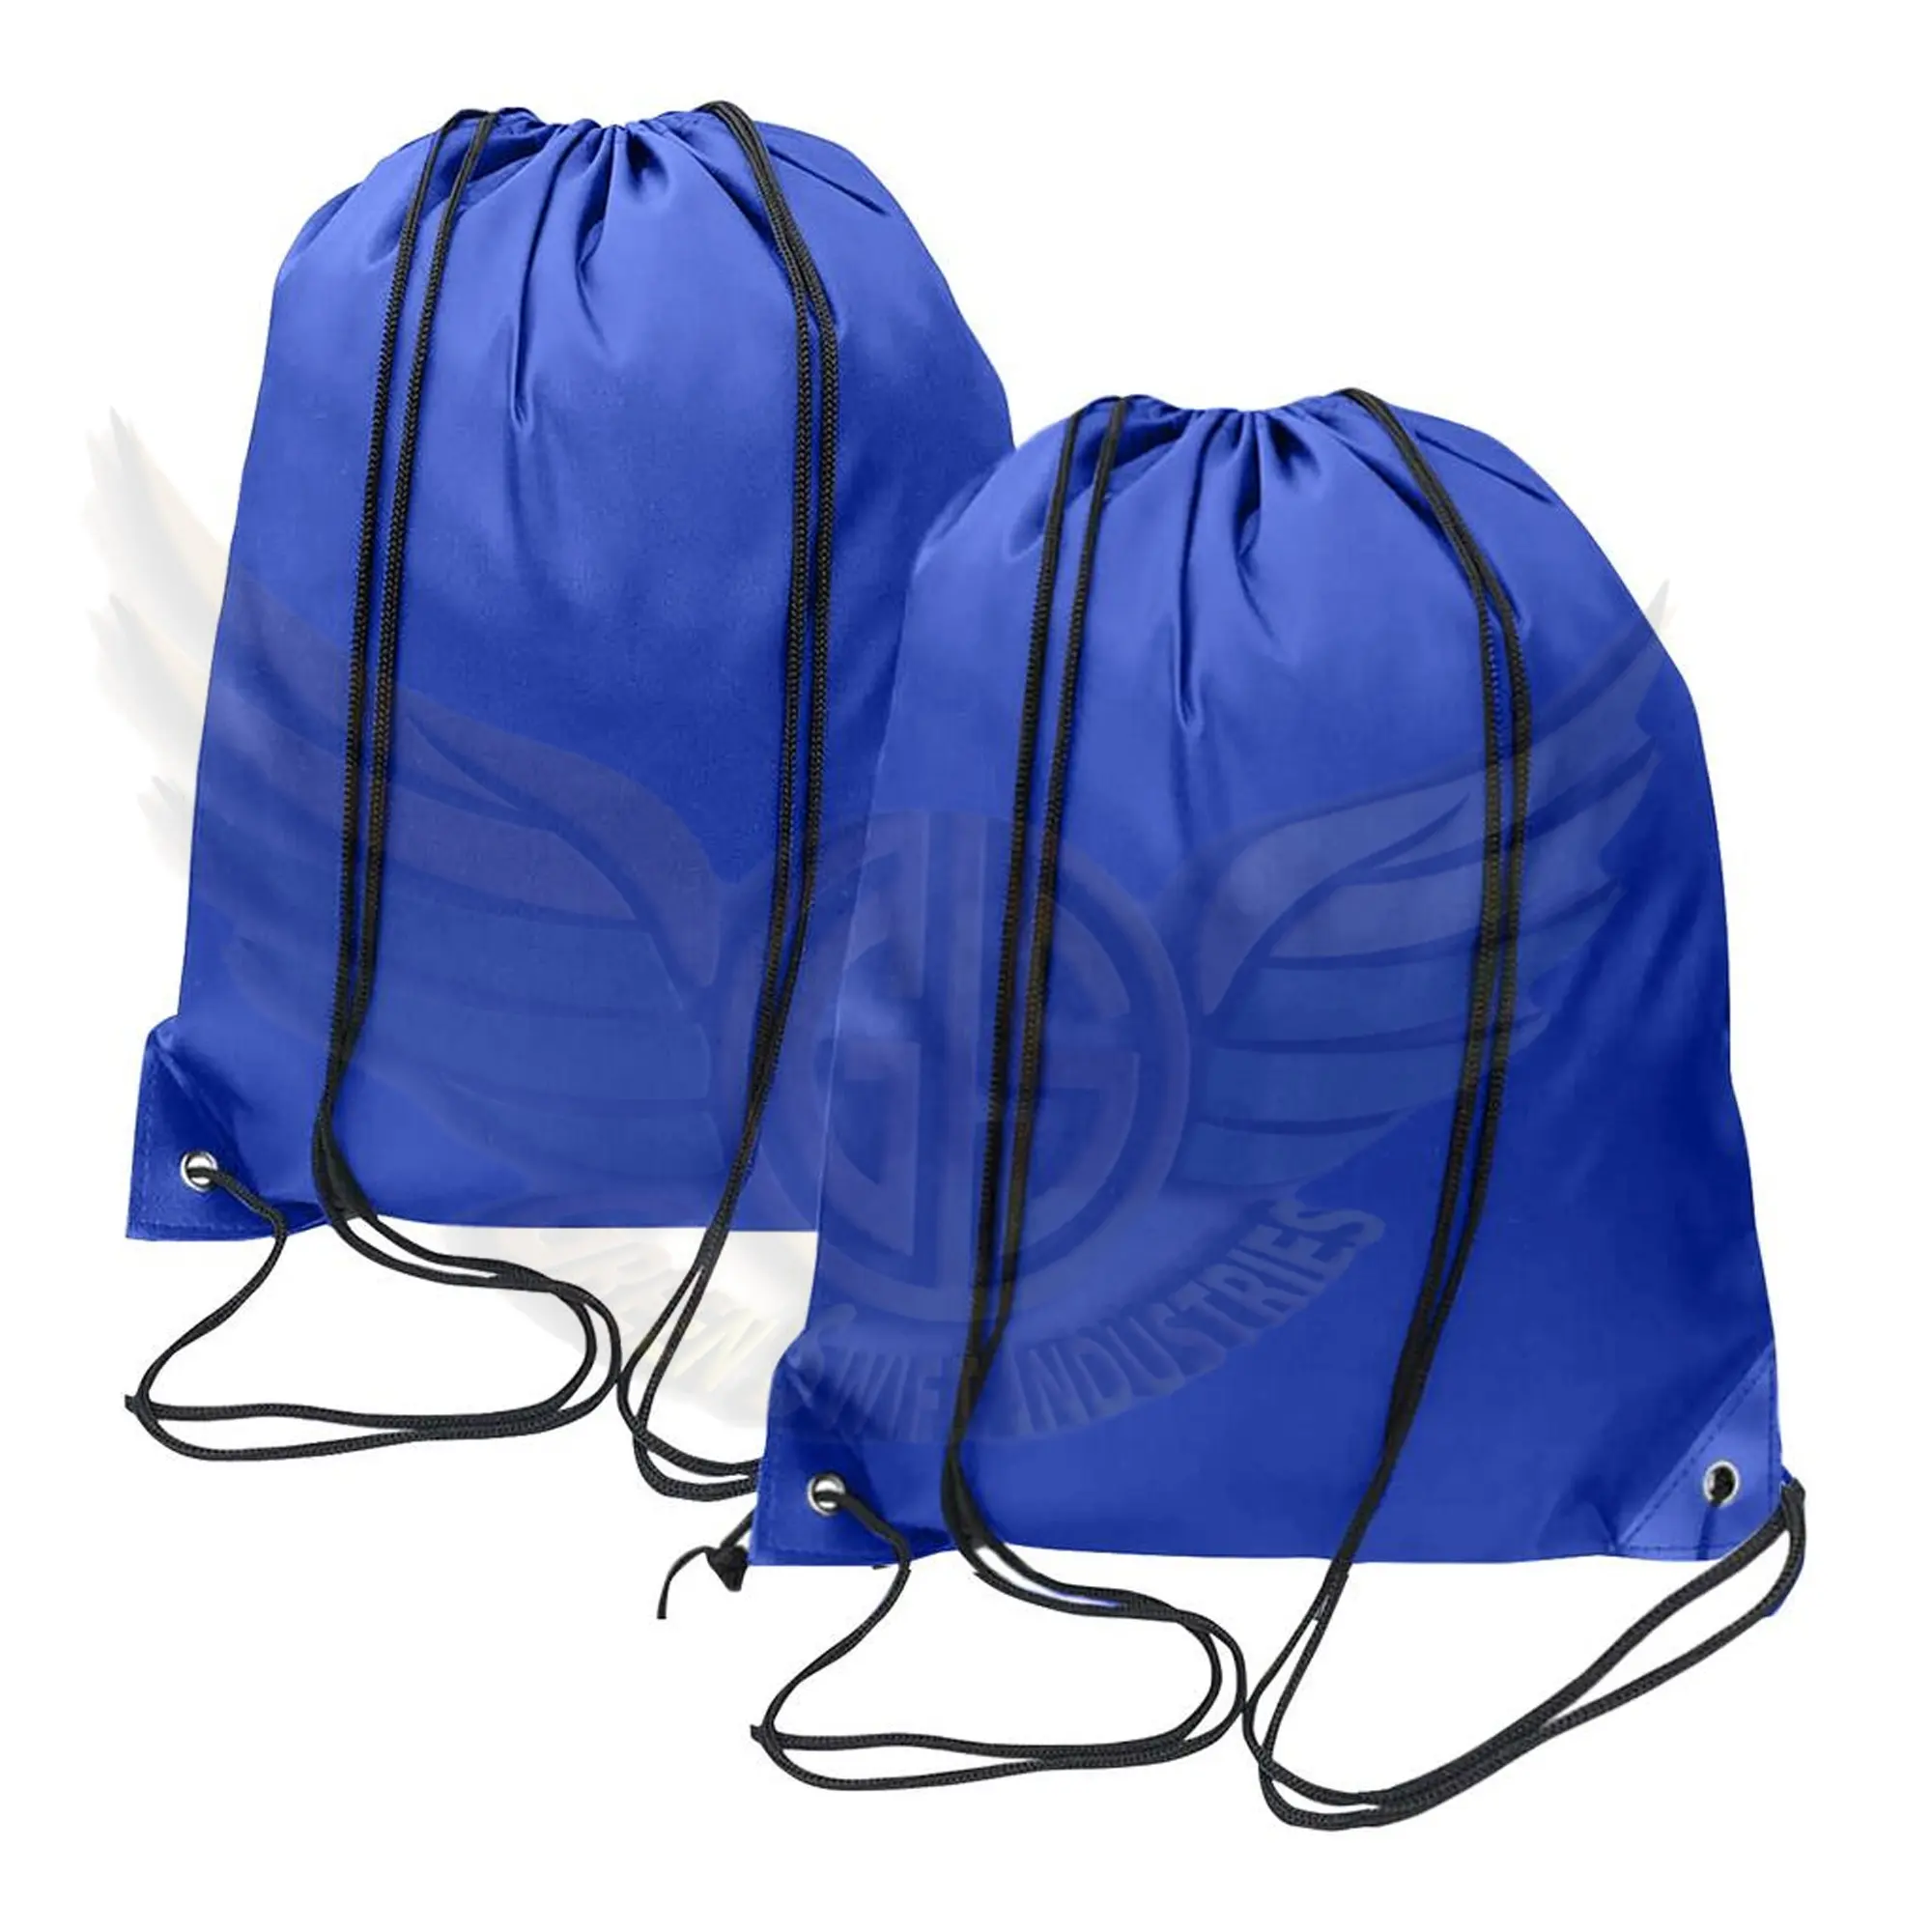 Backpack Drawstring Gym Bag Unisex Sports Bags Swimming Bag Drawstring Bag Rucksack Gym Beach Bag, Perfect For School, Books